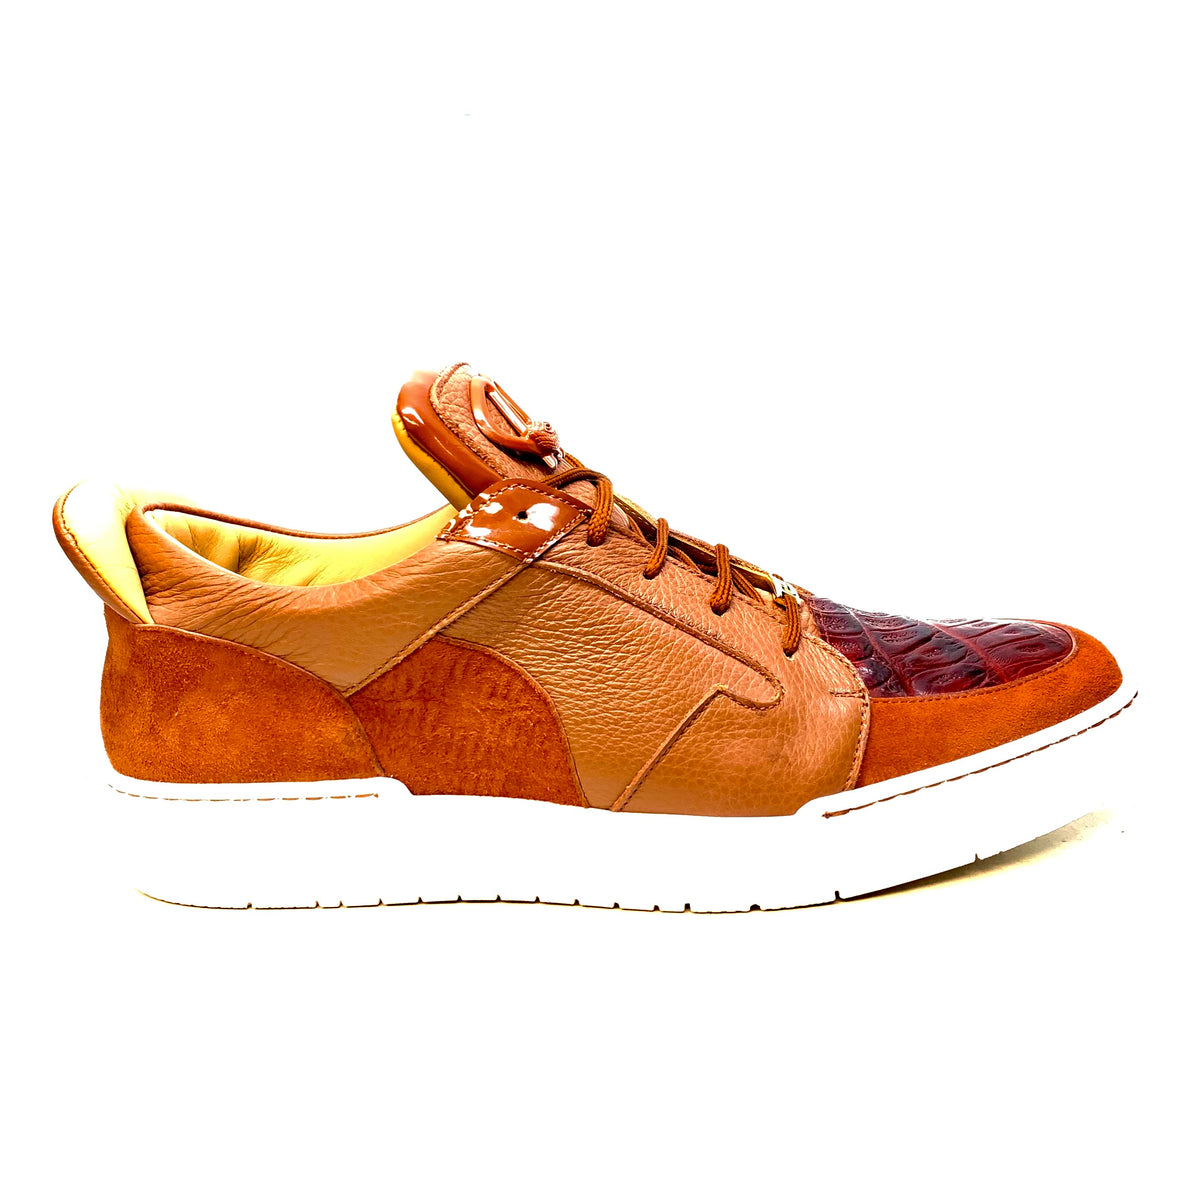 Mauri '8412' Two Tone Brown Alligator/Suede/Patent Leather Low Top Sneakers - Dudes Boutique